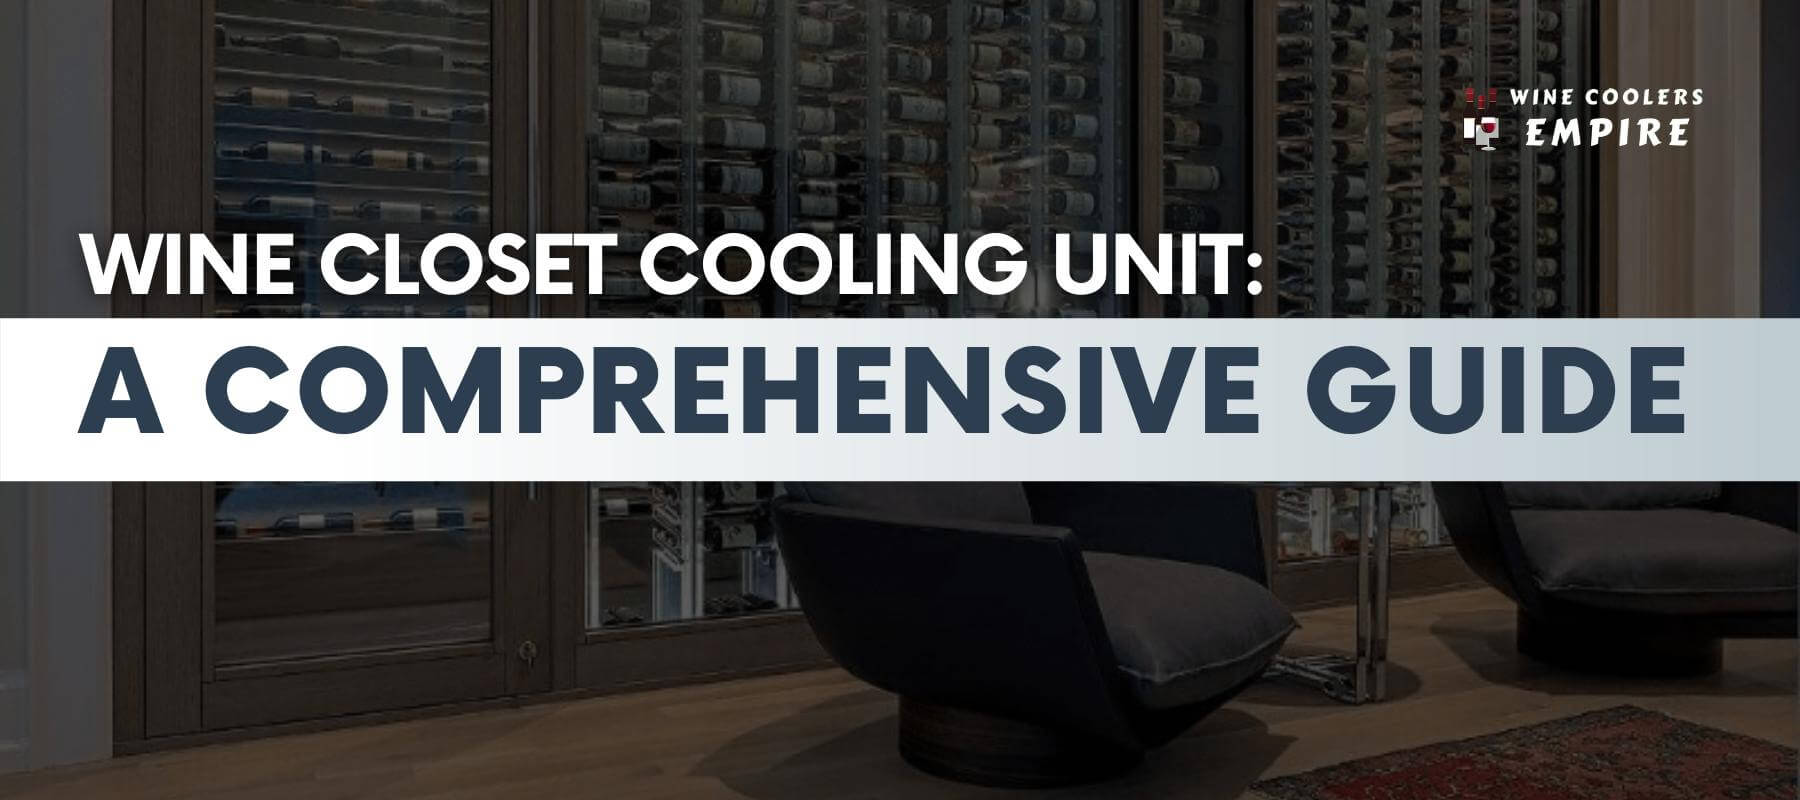 Wine Closet Cooling Unit: A Comprehensive Guide | Wine Coolers Empire